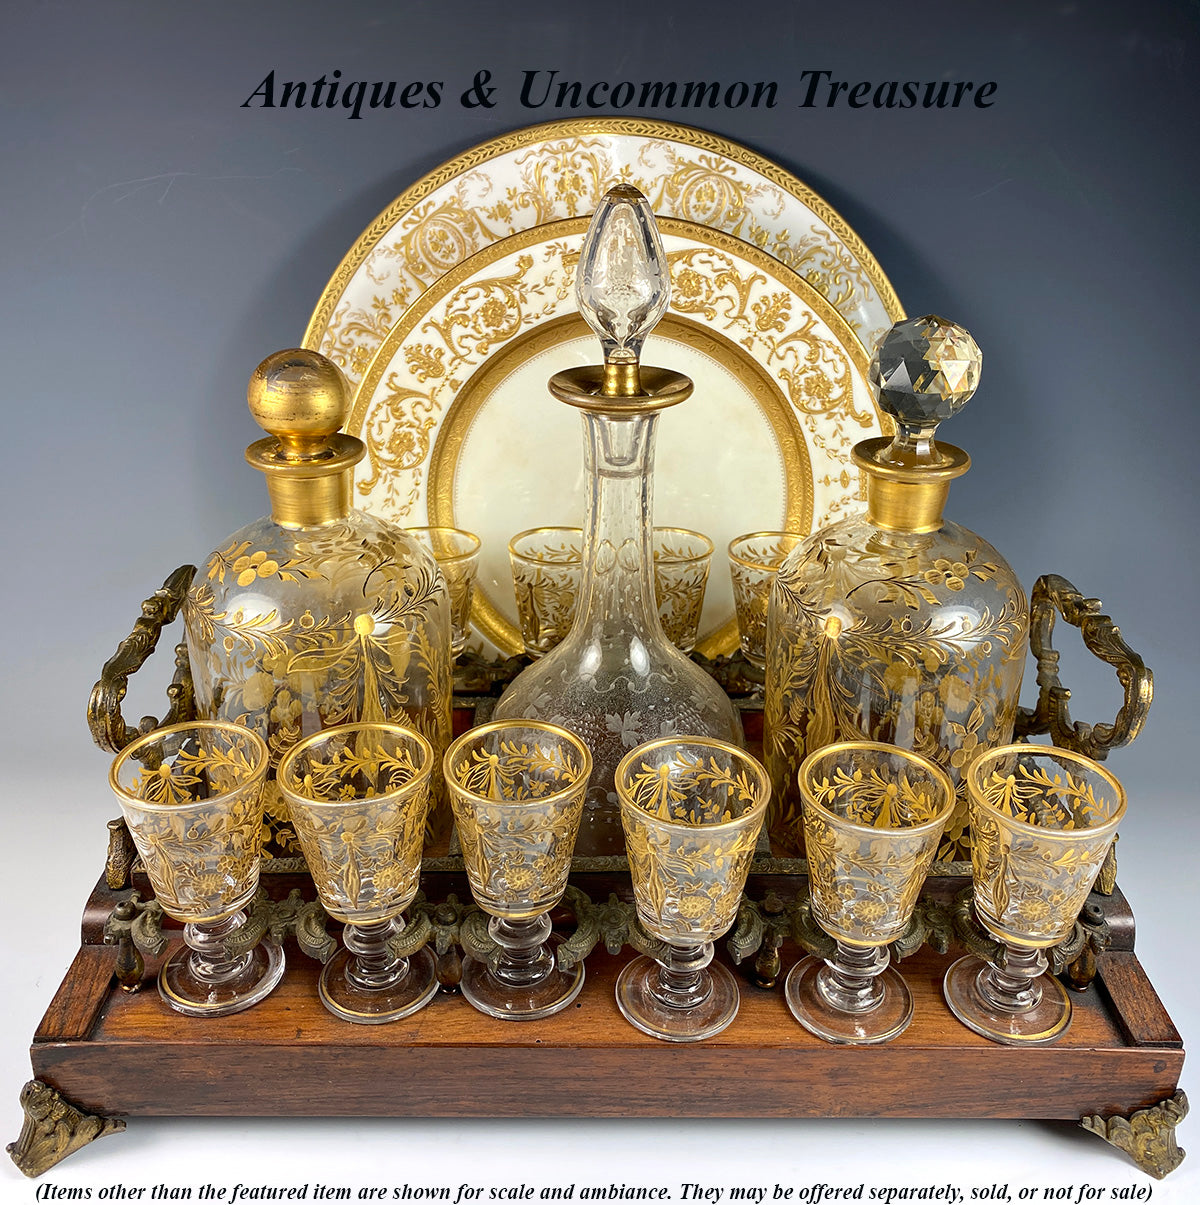 Fine Antique French Liqueur Service, Tray, 12 Cordial Stems, 2 Matching Decanters, +1